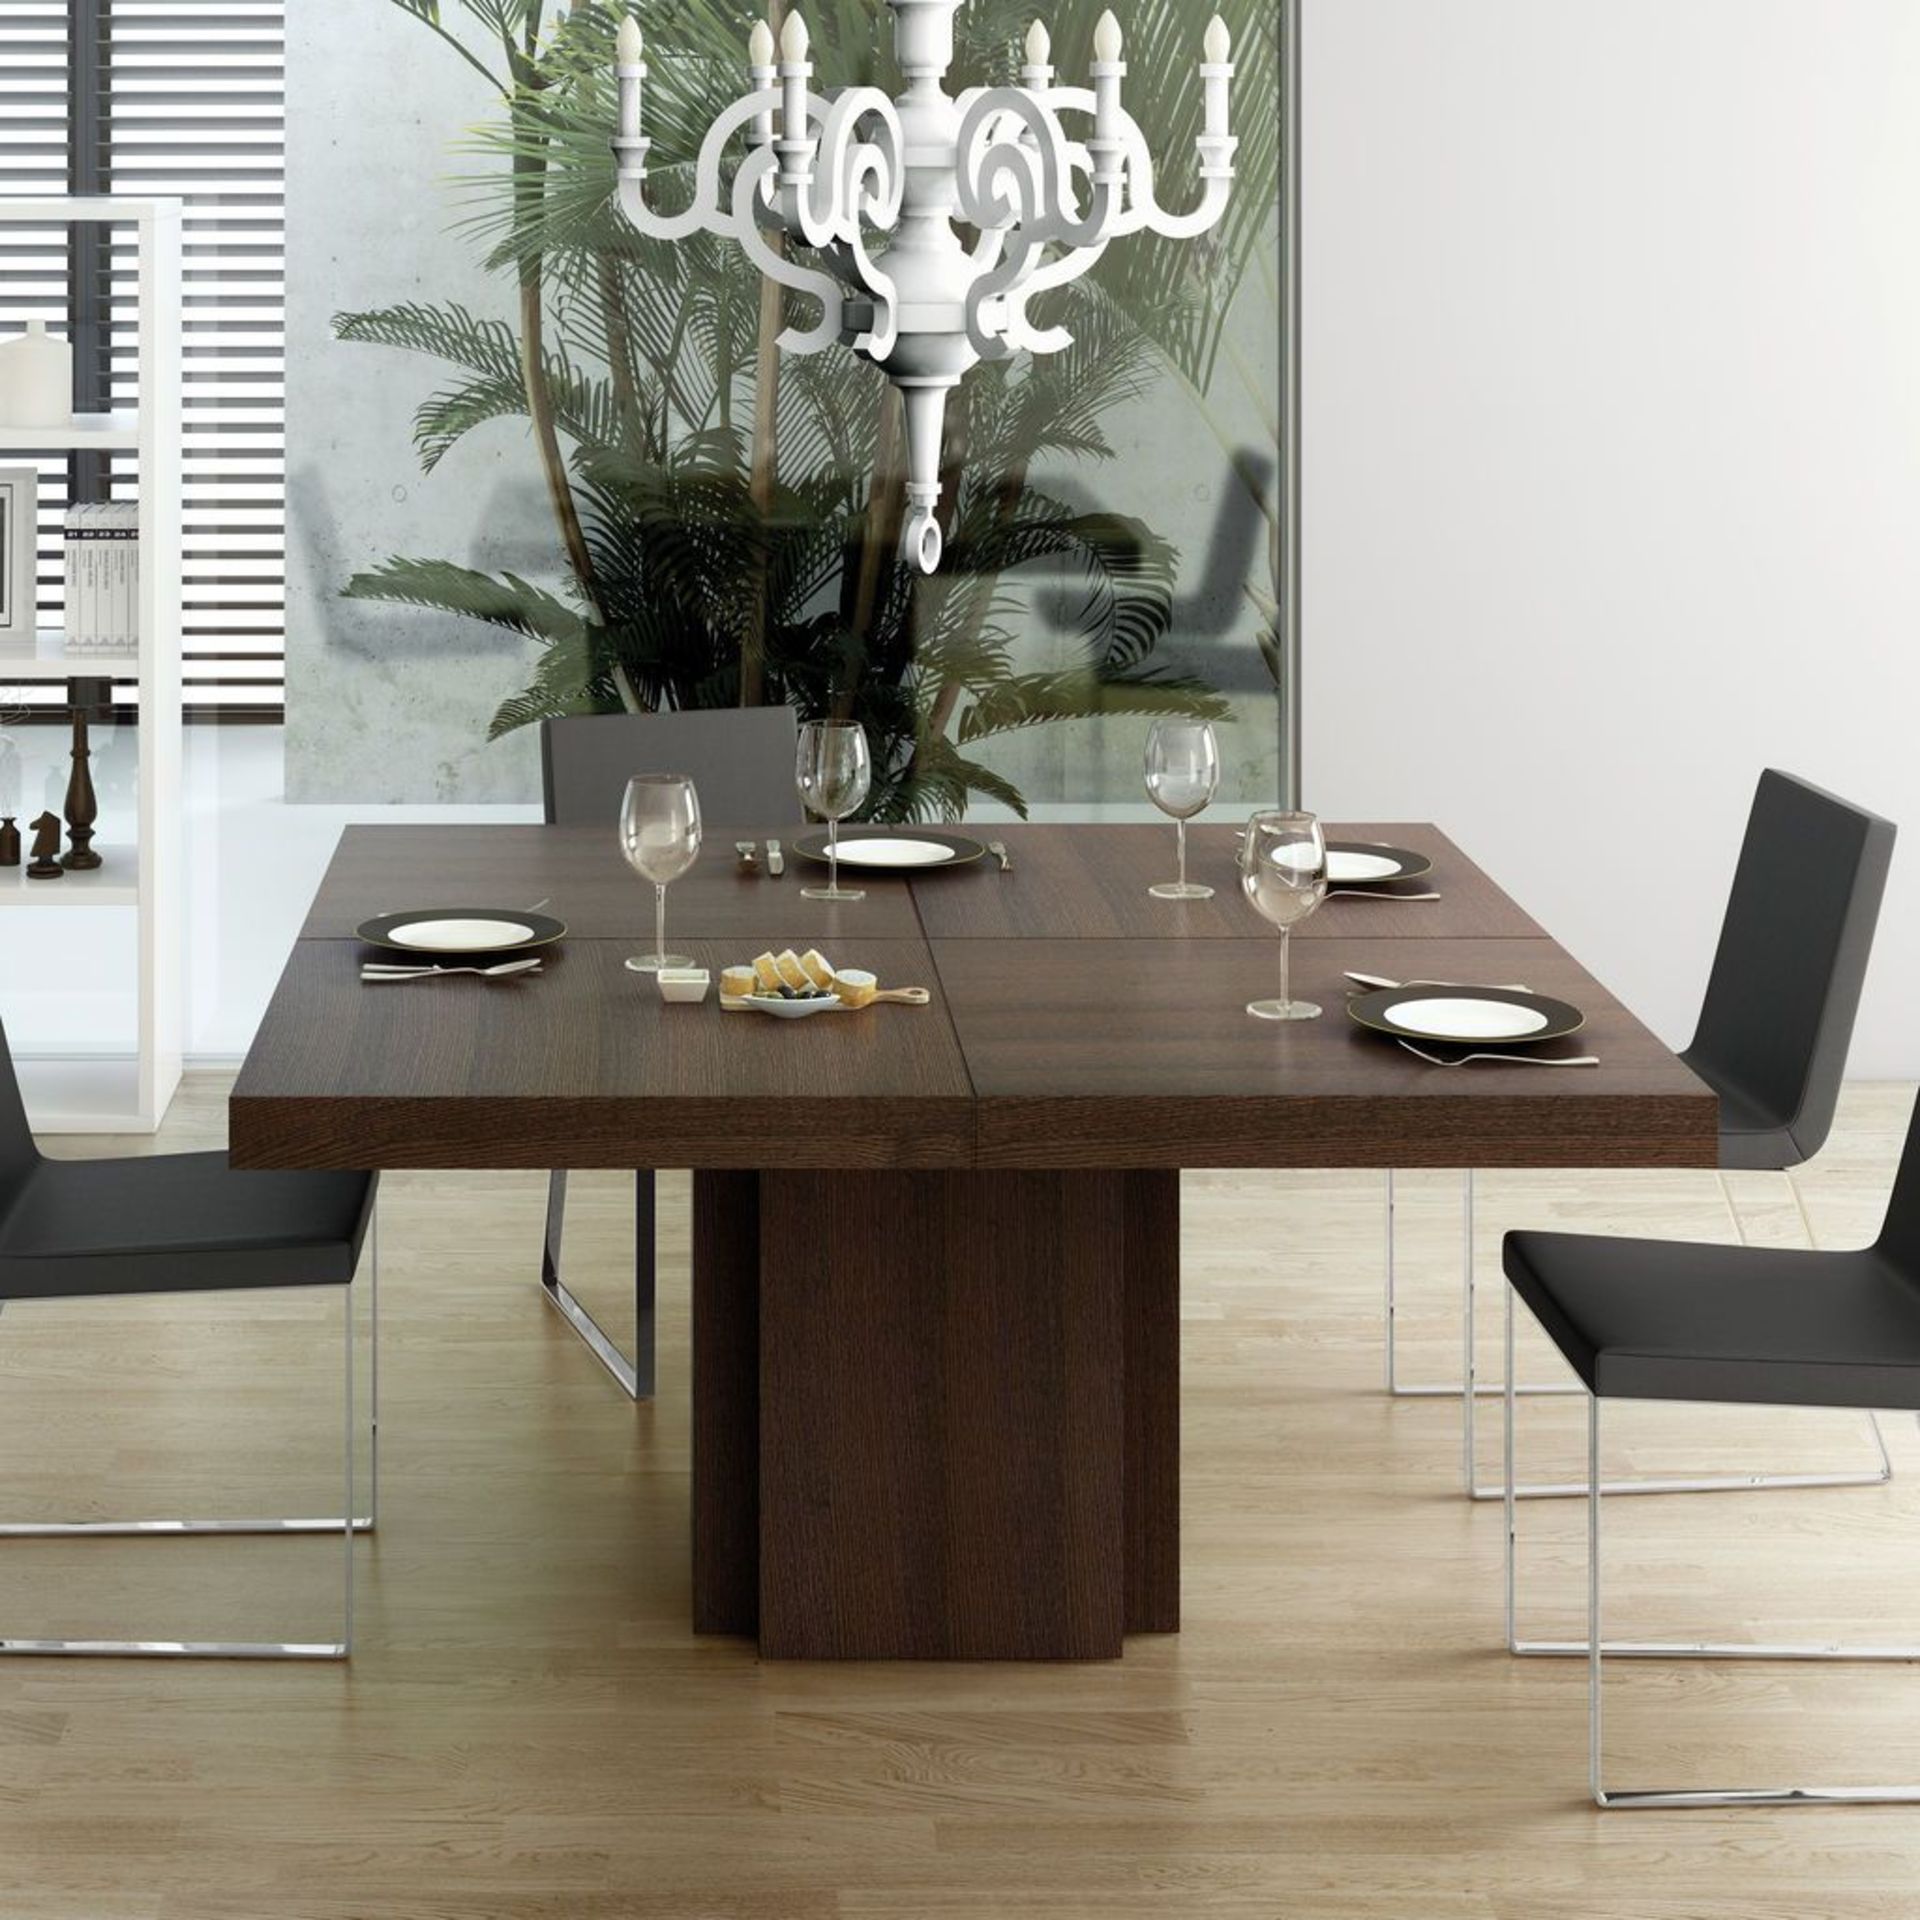 1 x DUSK Square Designer Dining Table - Dimensions: 150x150x75cm - New & Boxed Stock - RRP £1,155.00 - Image 4 of 5